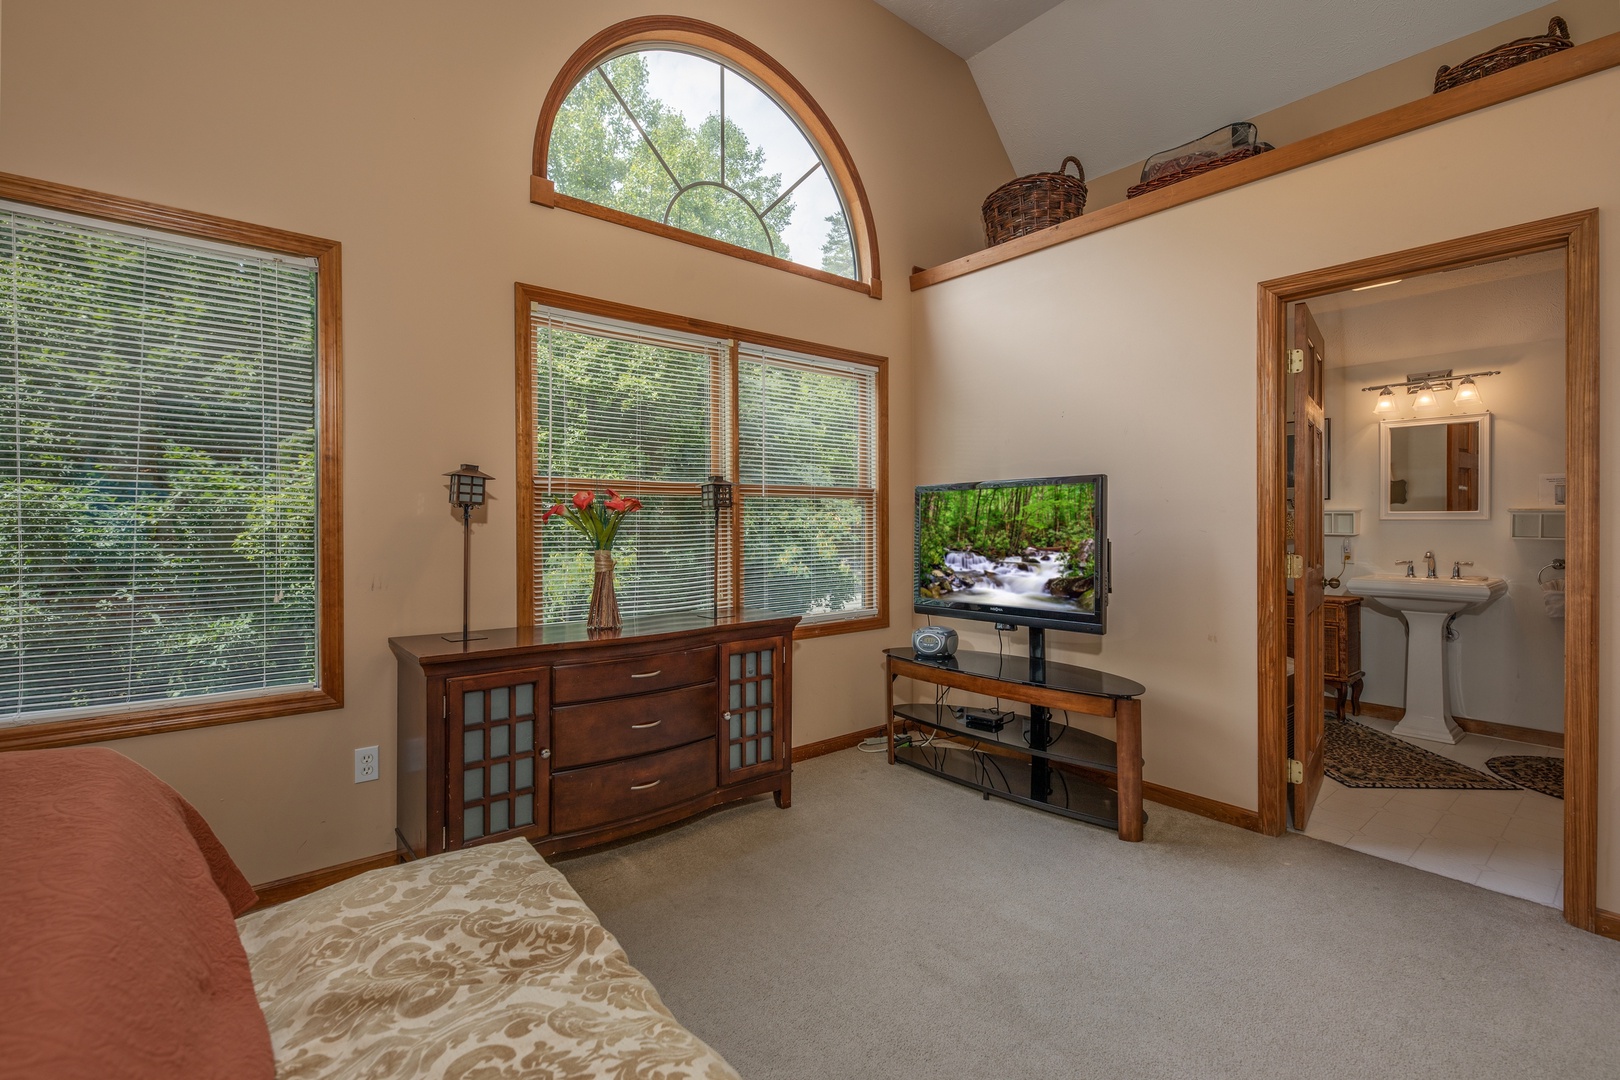 Dresser, tv, and en suite bath at Amazing Memories, a 3 bedroom cabin rental located in Pigeon Forge